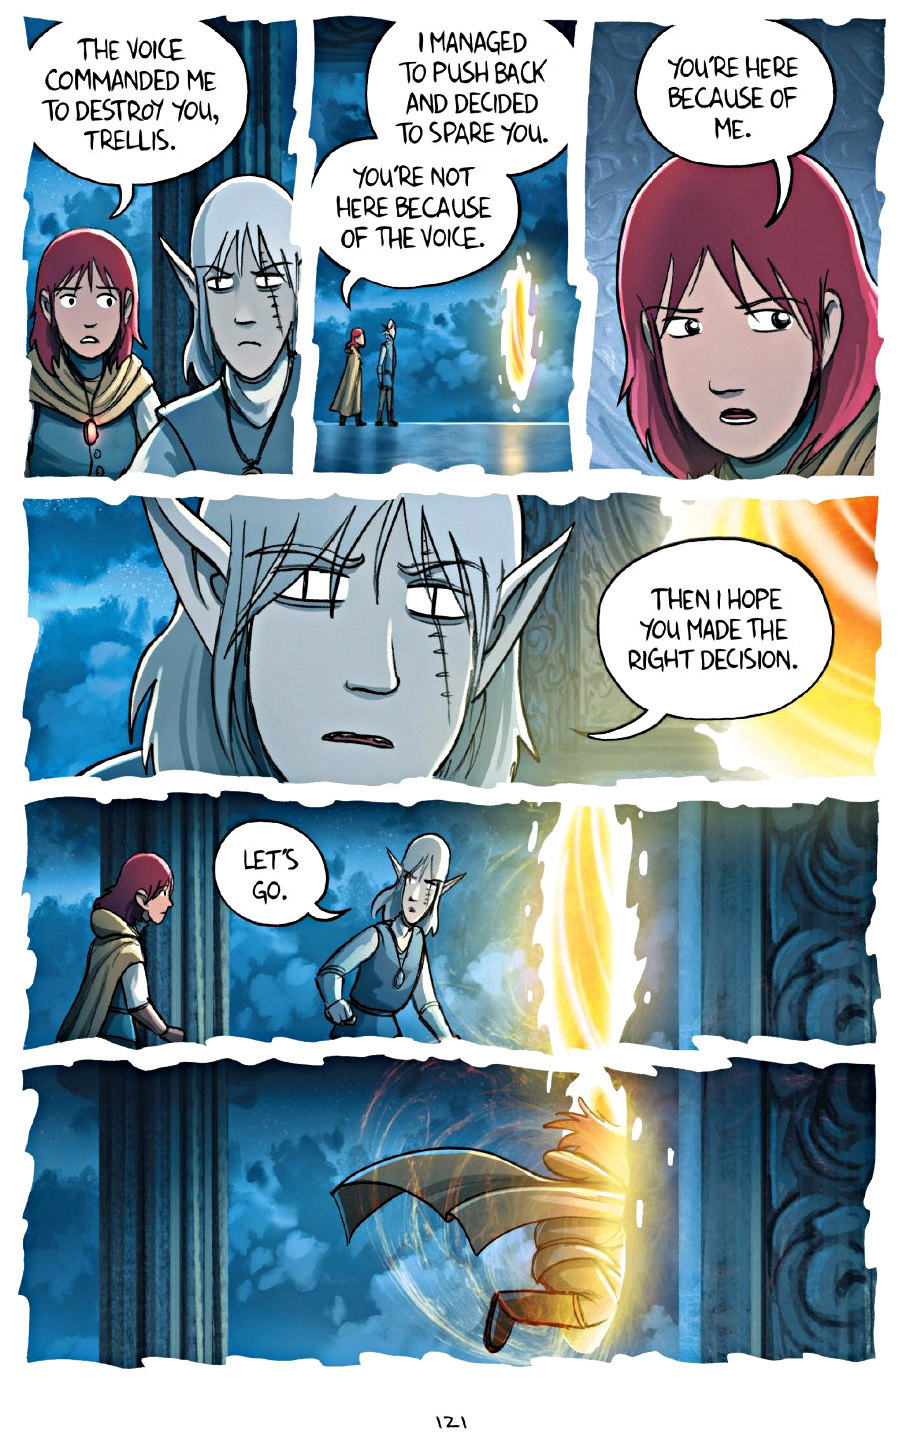 page 121 of amulet 7 firelight graphic novel